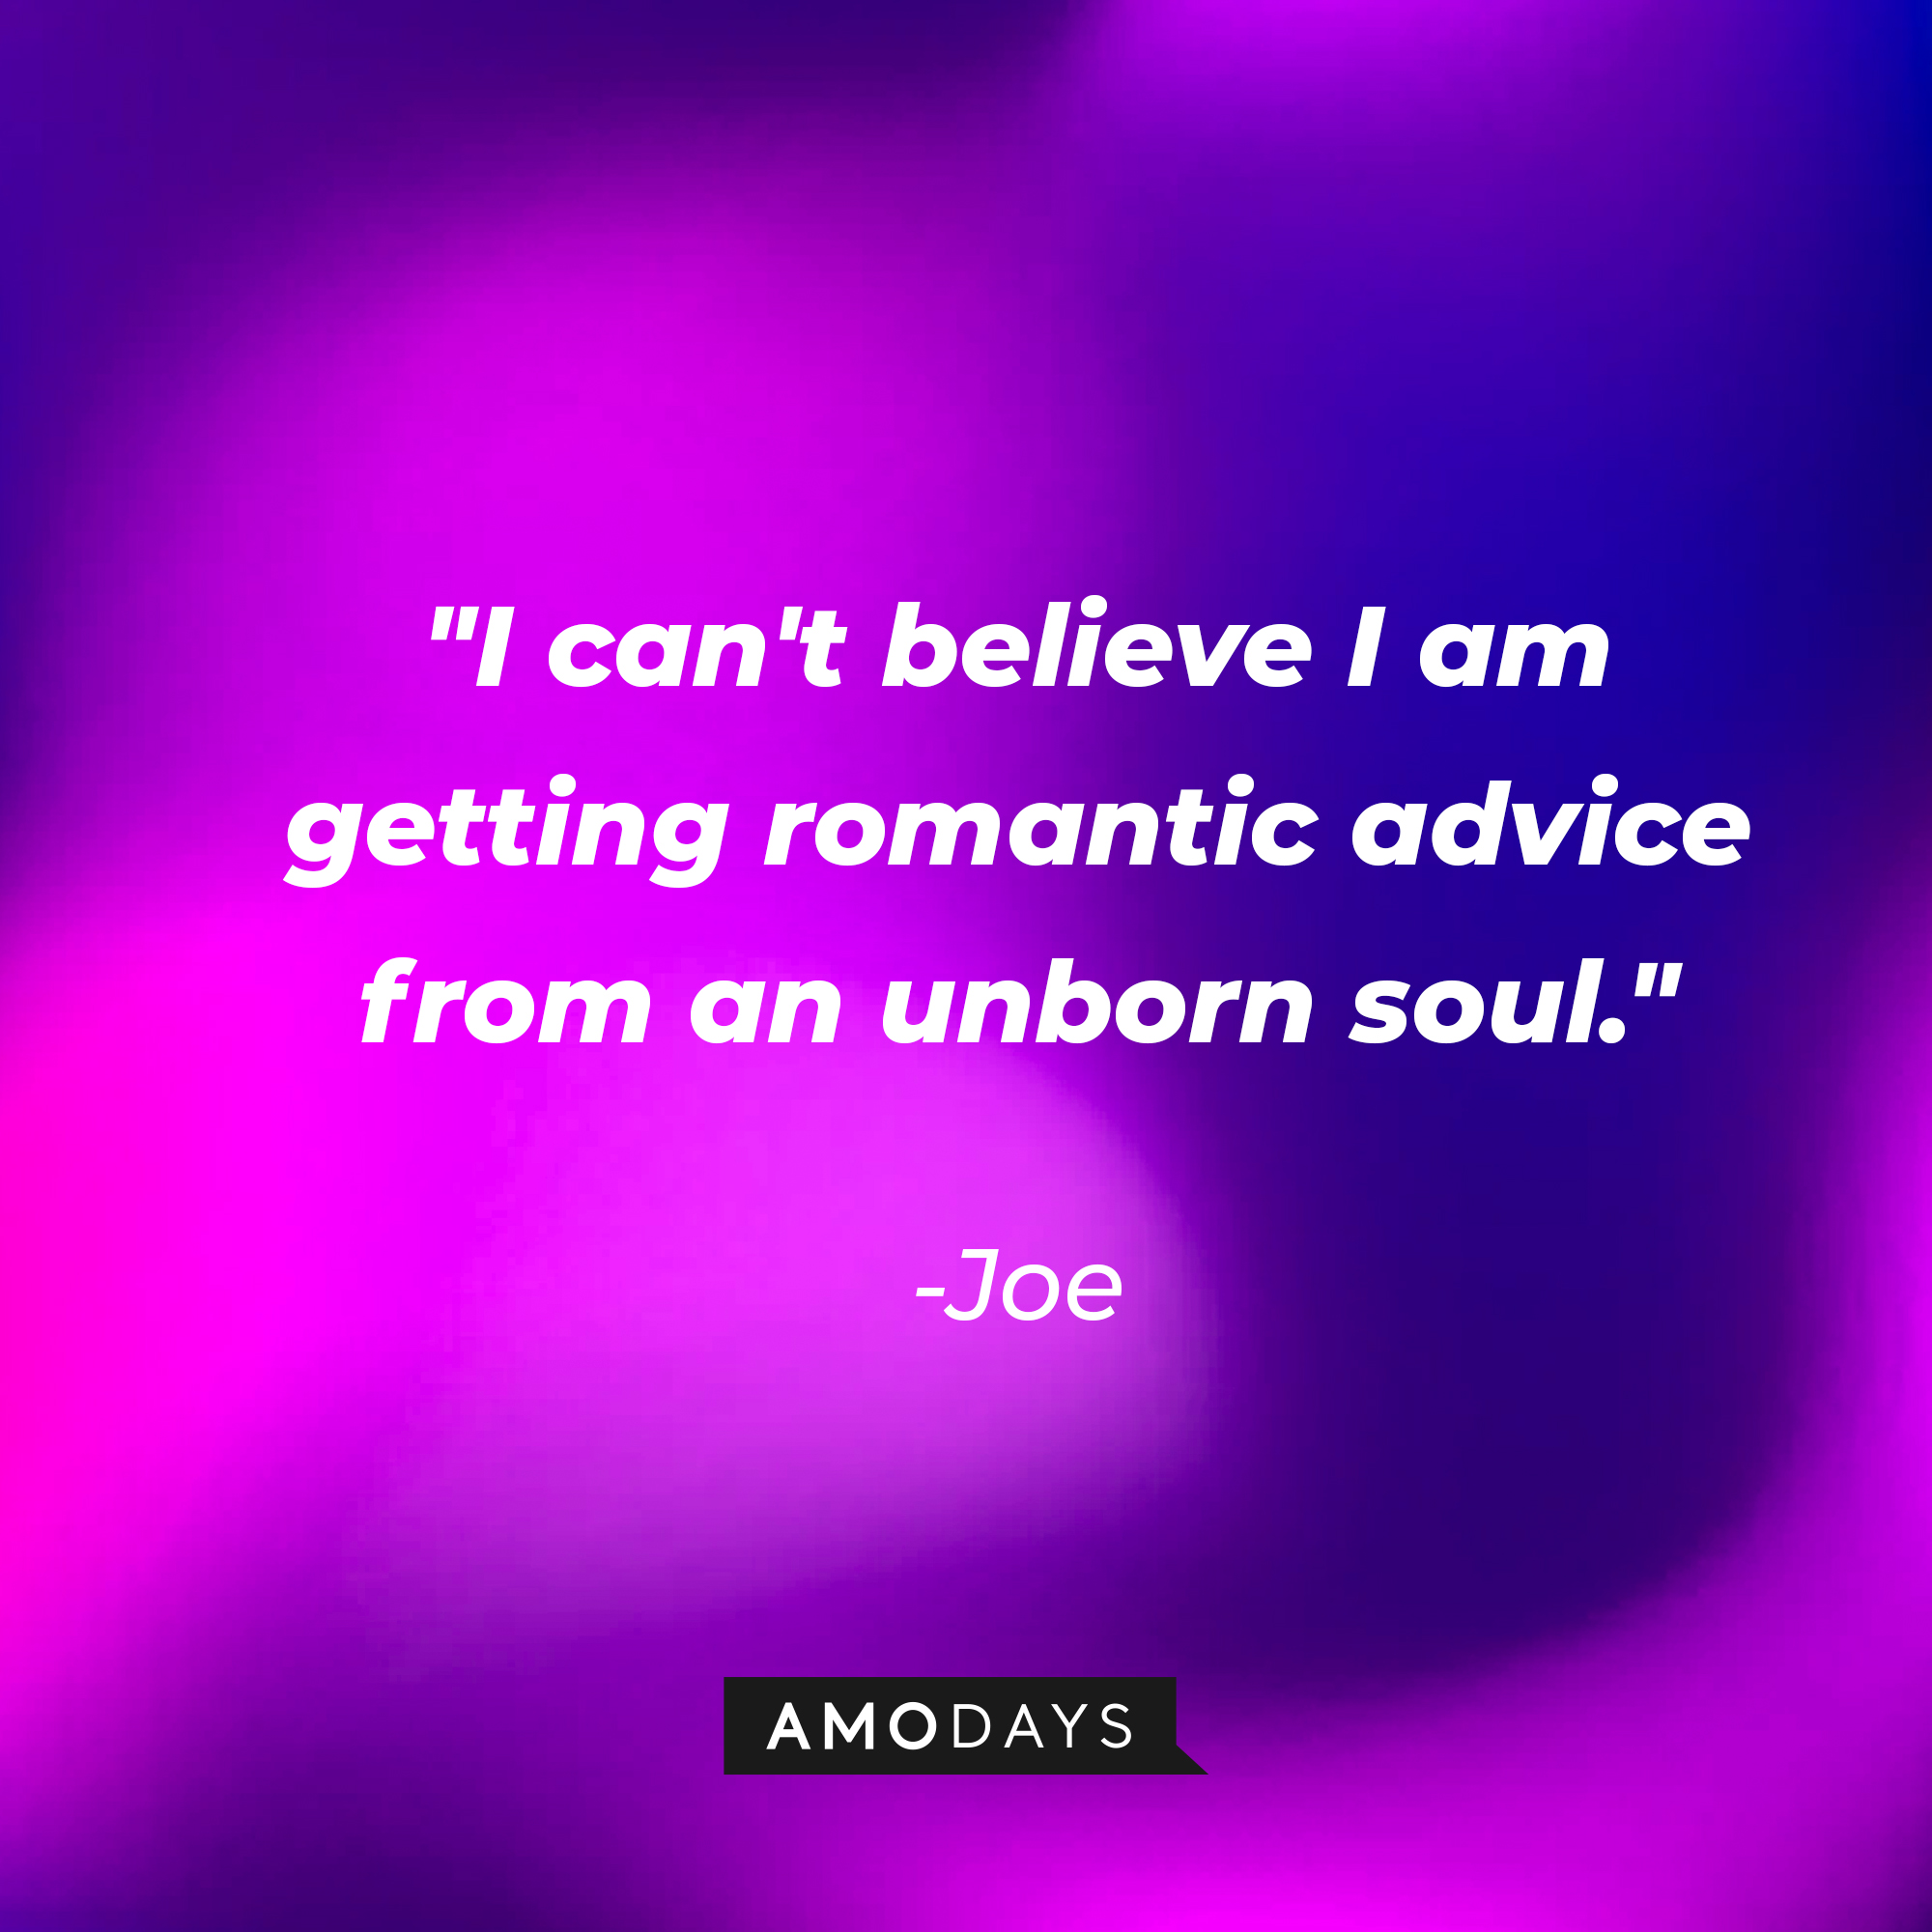 Joe's quote: "I can't believe I am getting romantic advice from an unborn soul." | Source: youtube.com/pixar